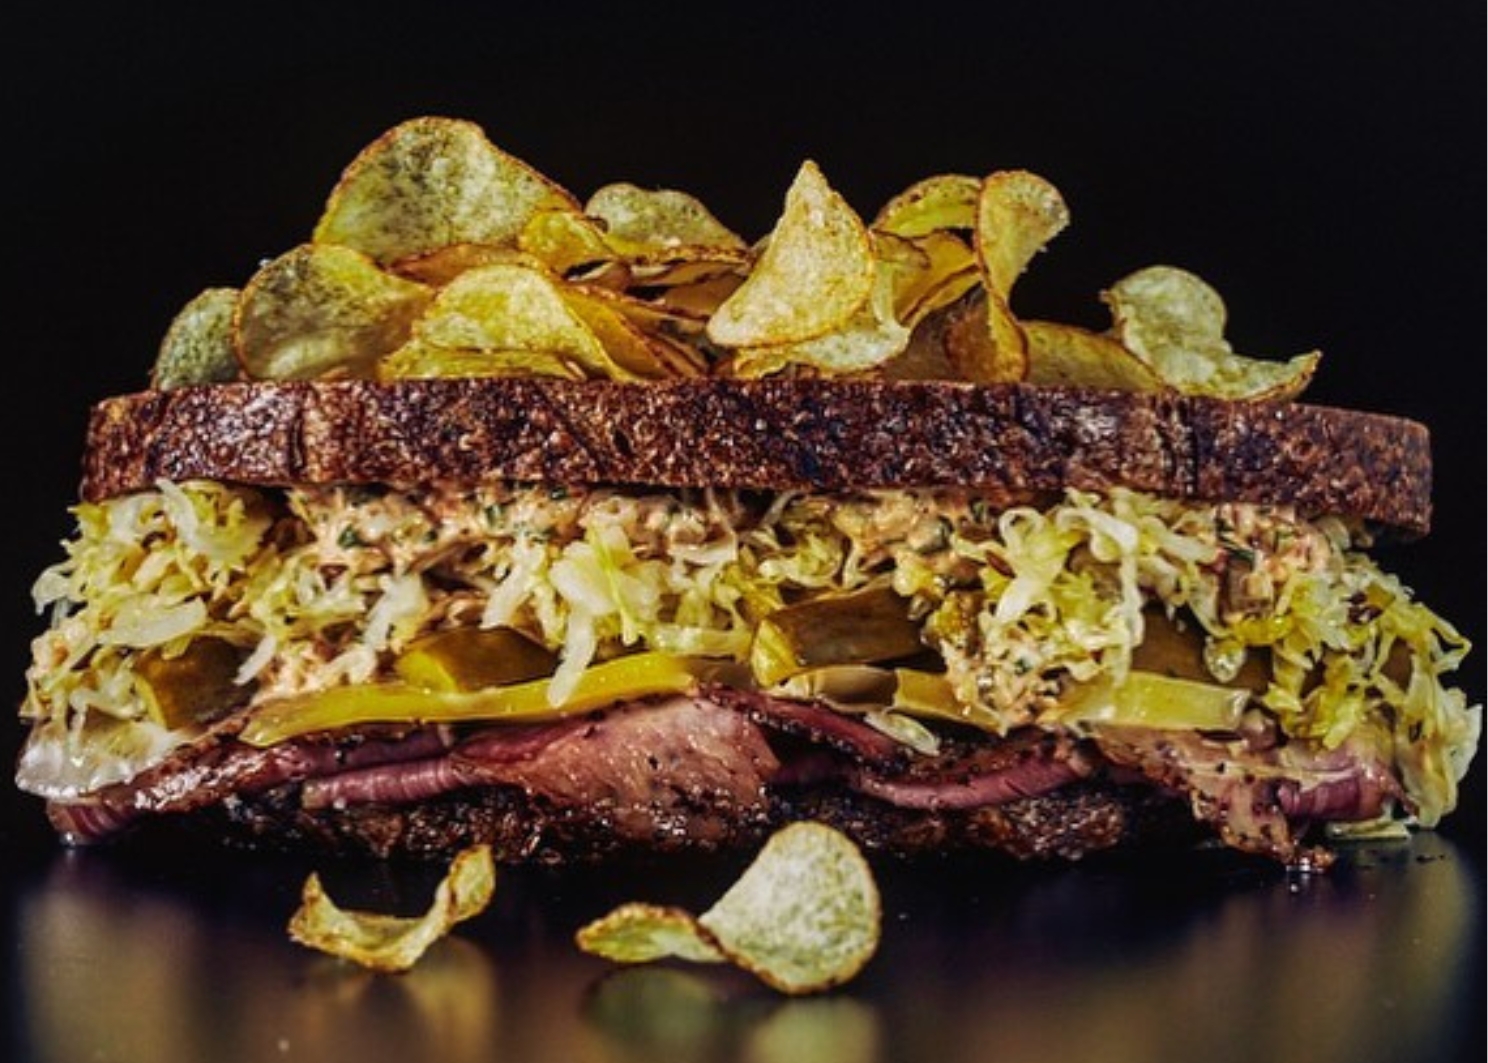 Ashes to Ashes – But is It Cricket? Three Gourmet Toasties to Dismiss Hunger.